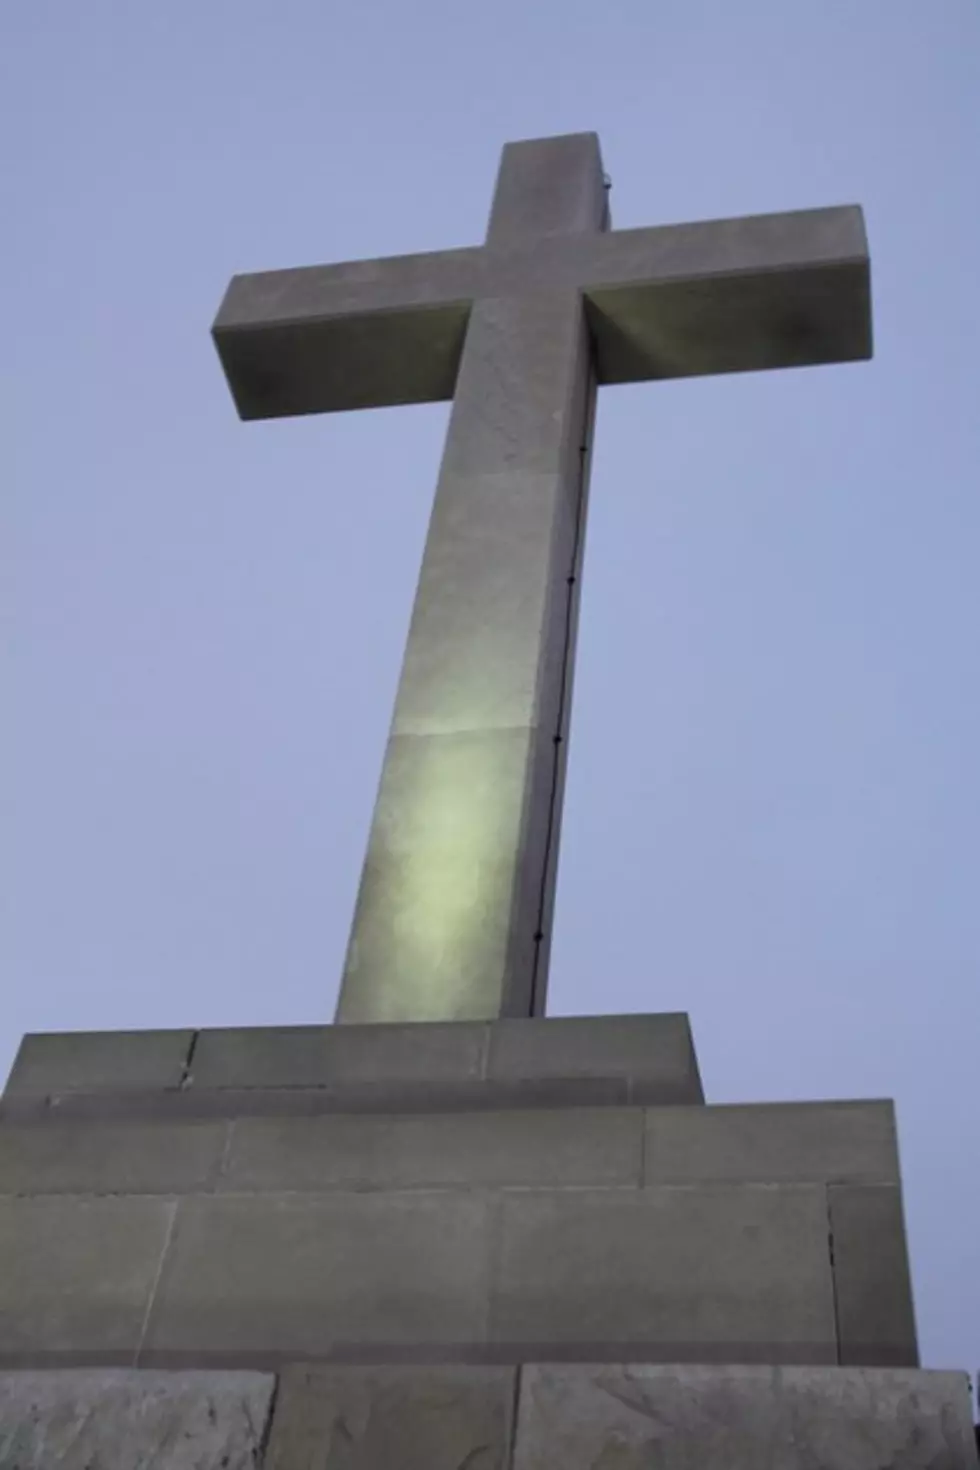 E. Idaho Town Removes Crosses after Complaint